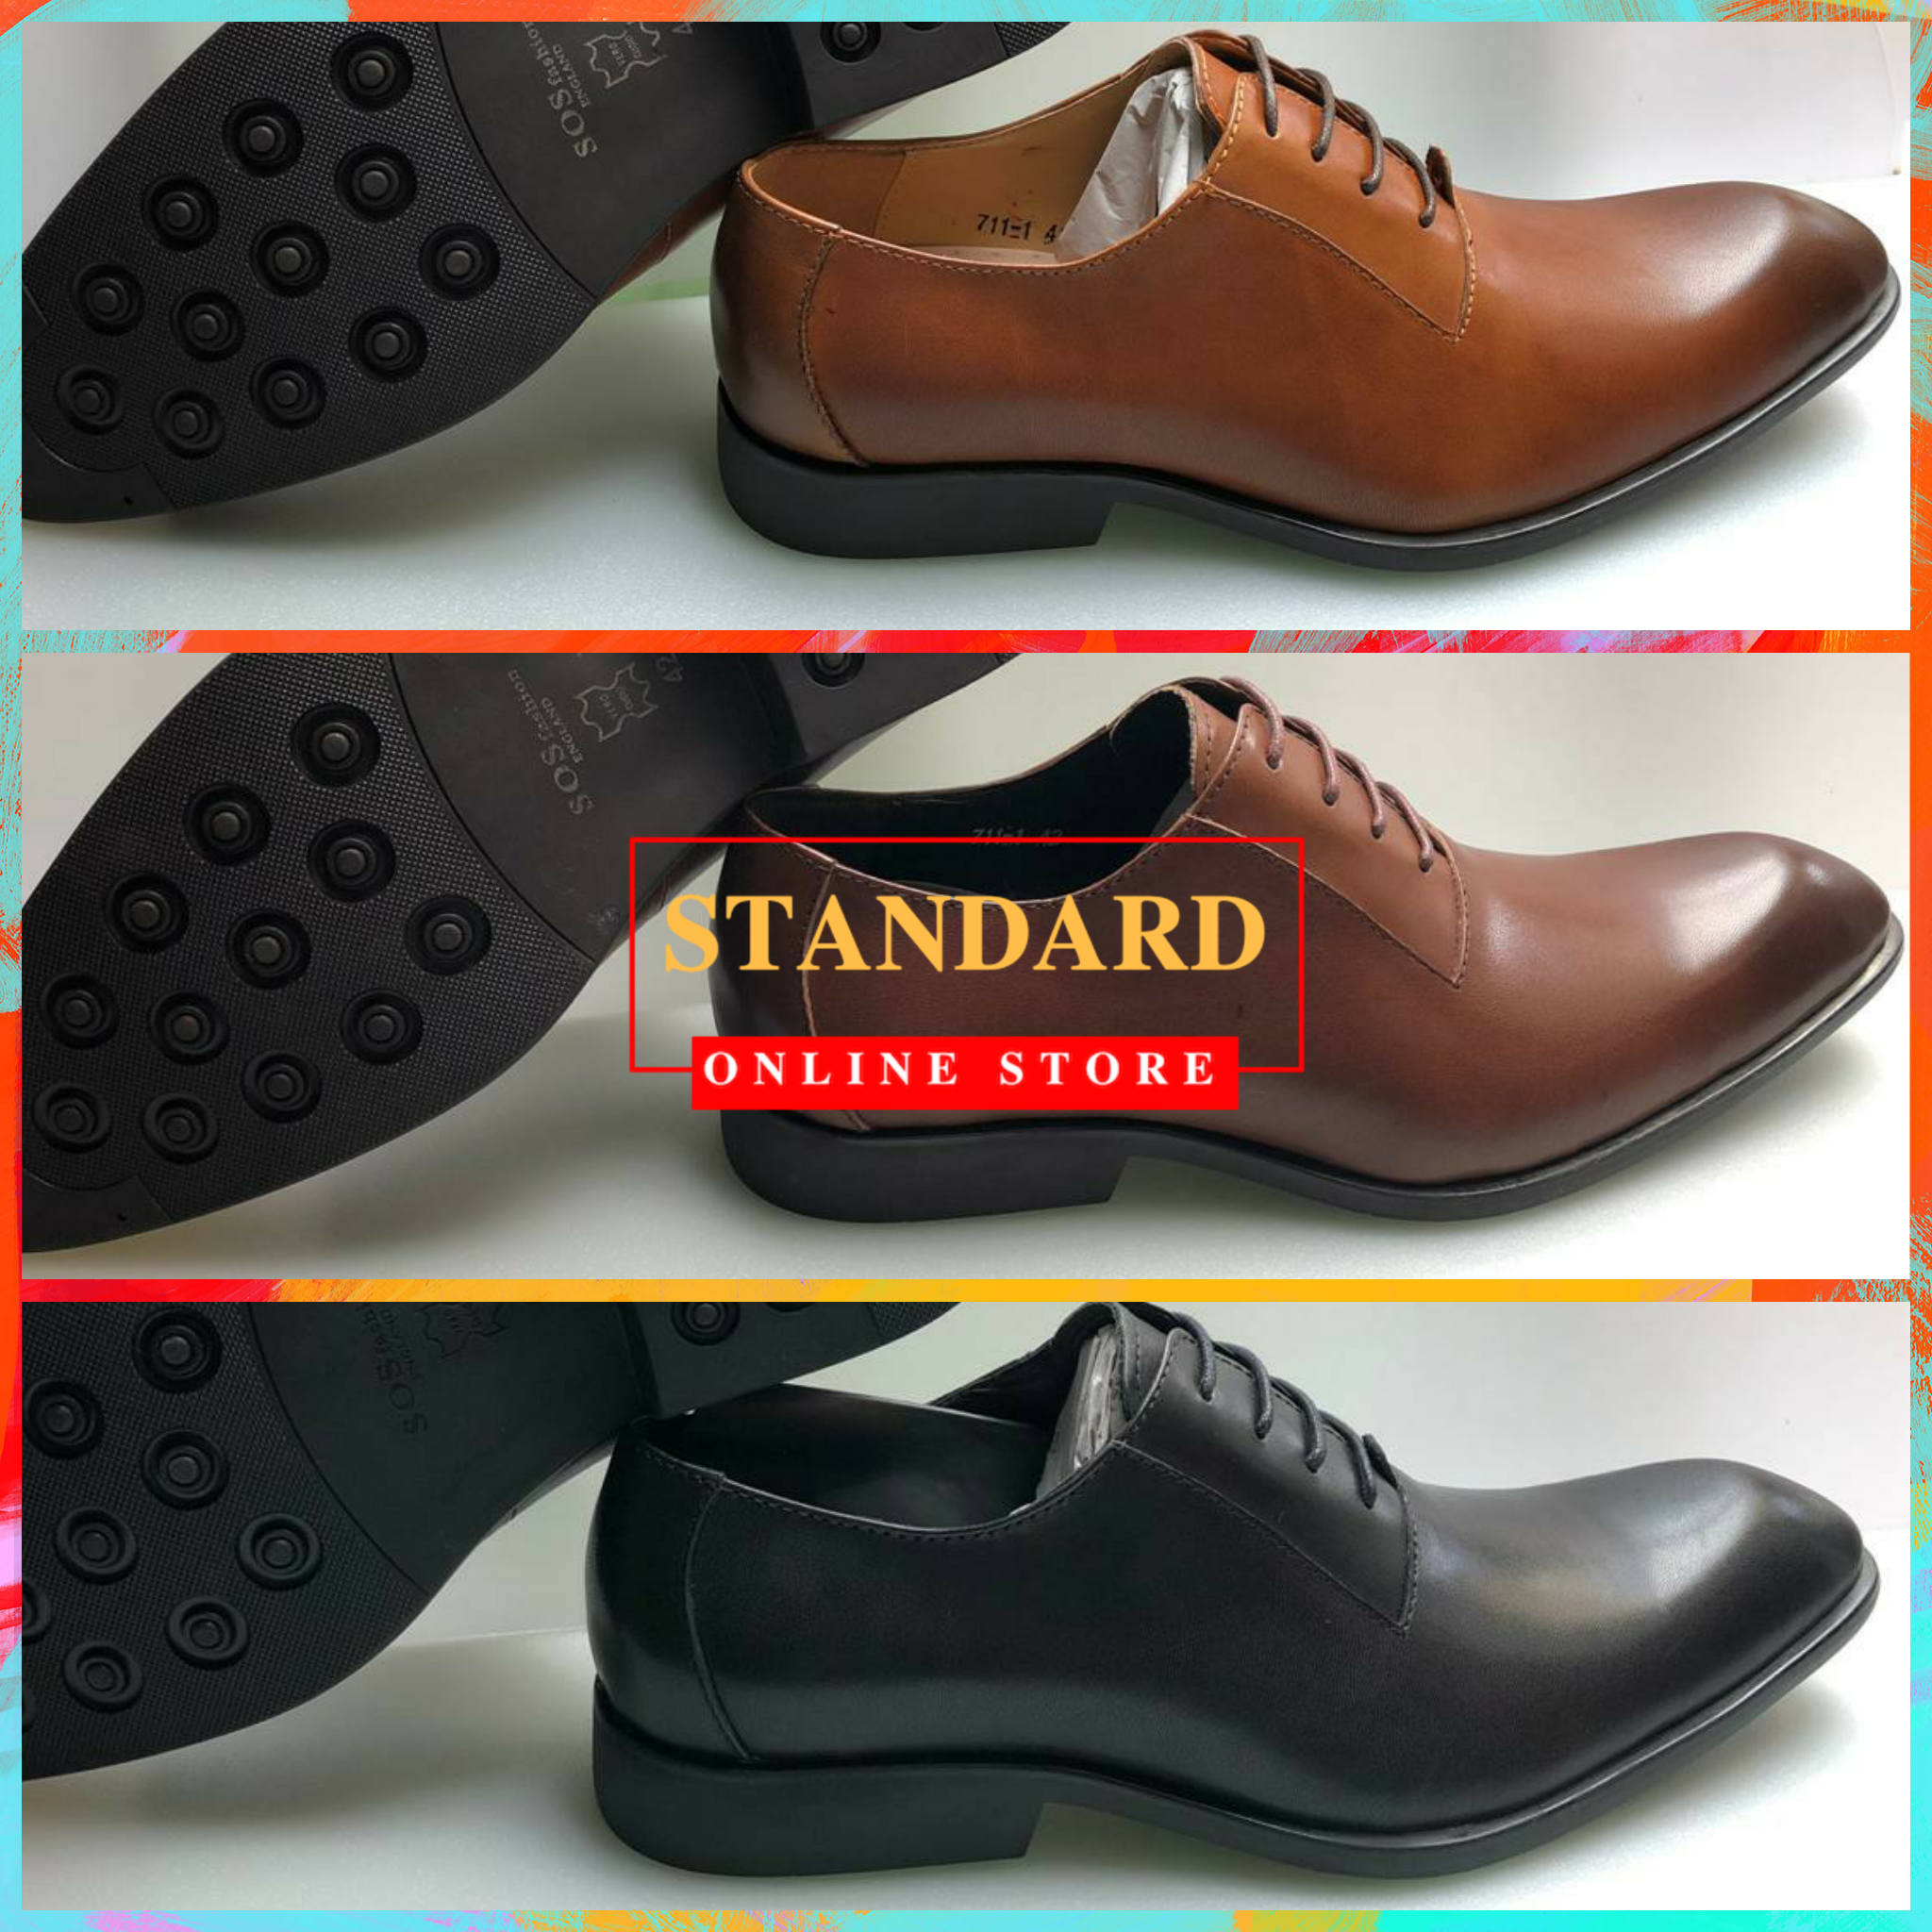 pure leather shoes online